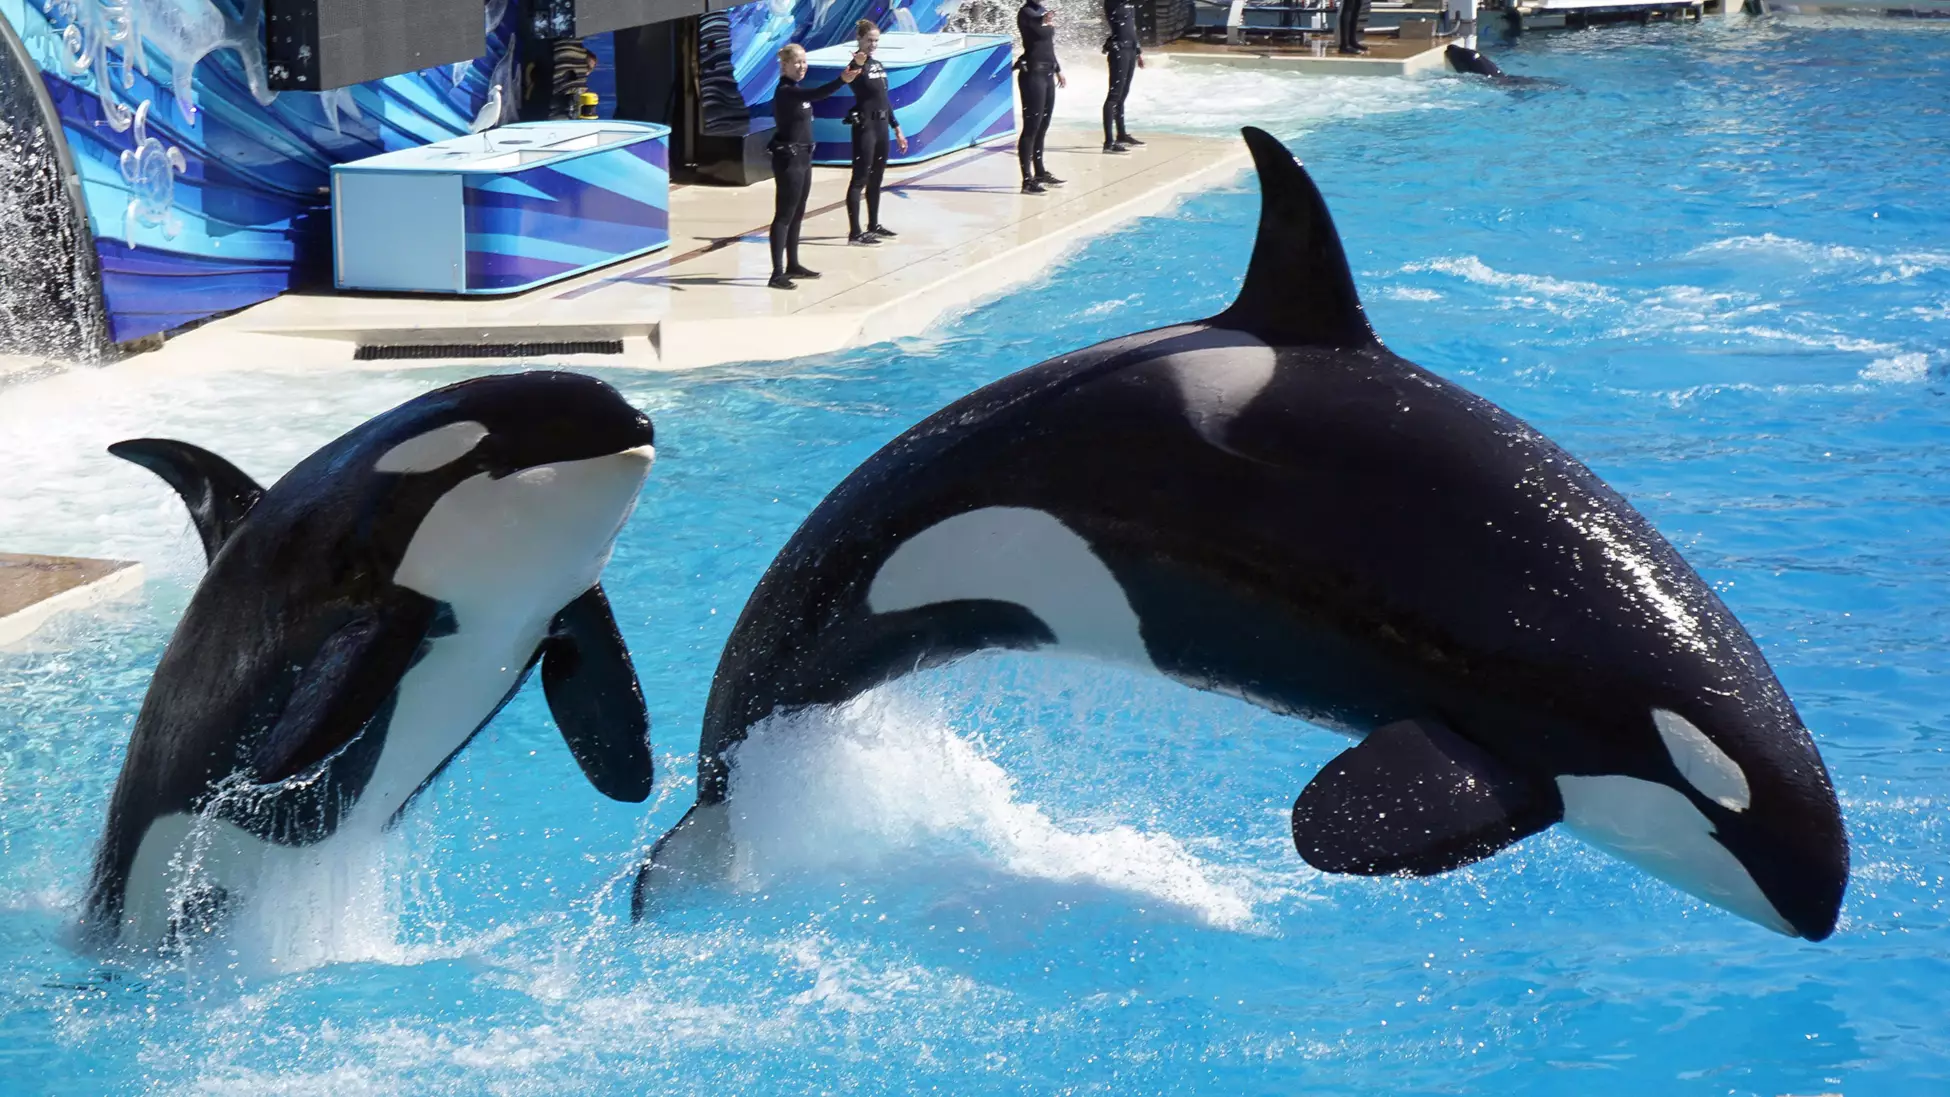 TripAdvisor Ends Ticket Sale To All Attractions That Import And Breed Dolphins And Whales